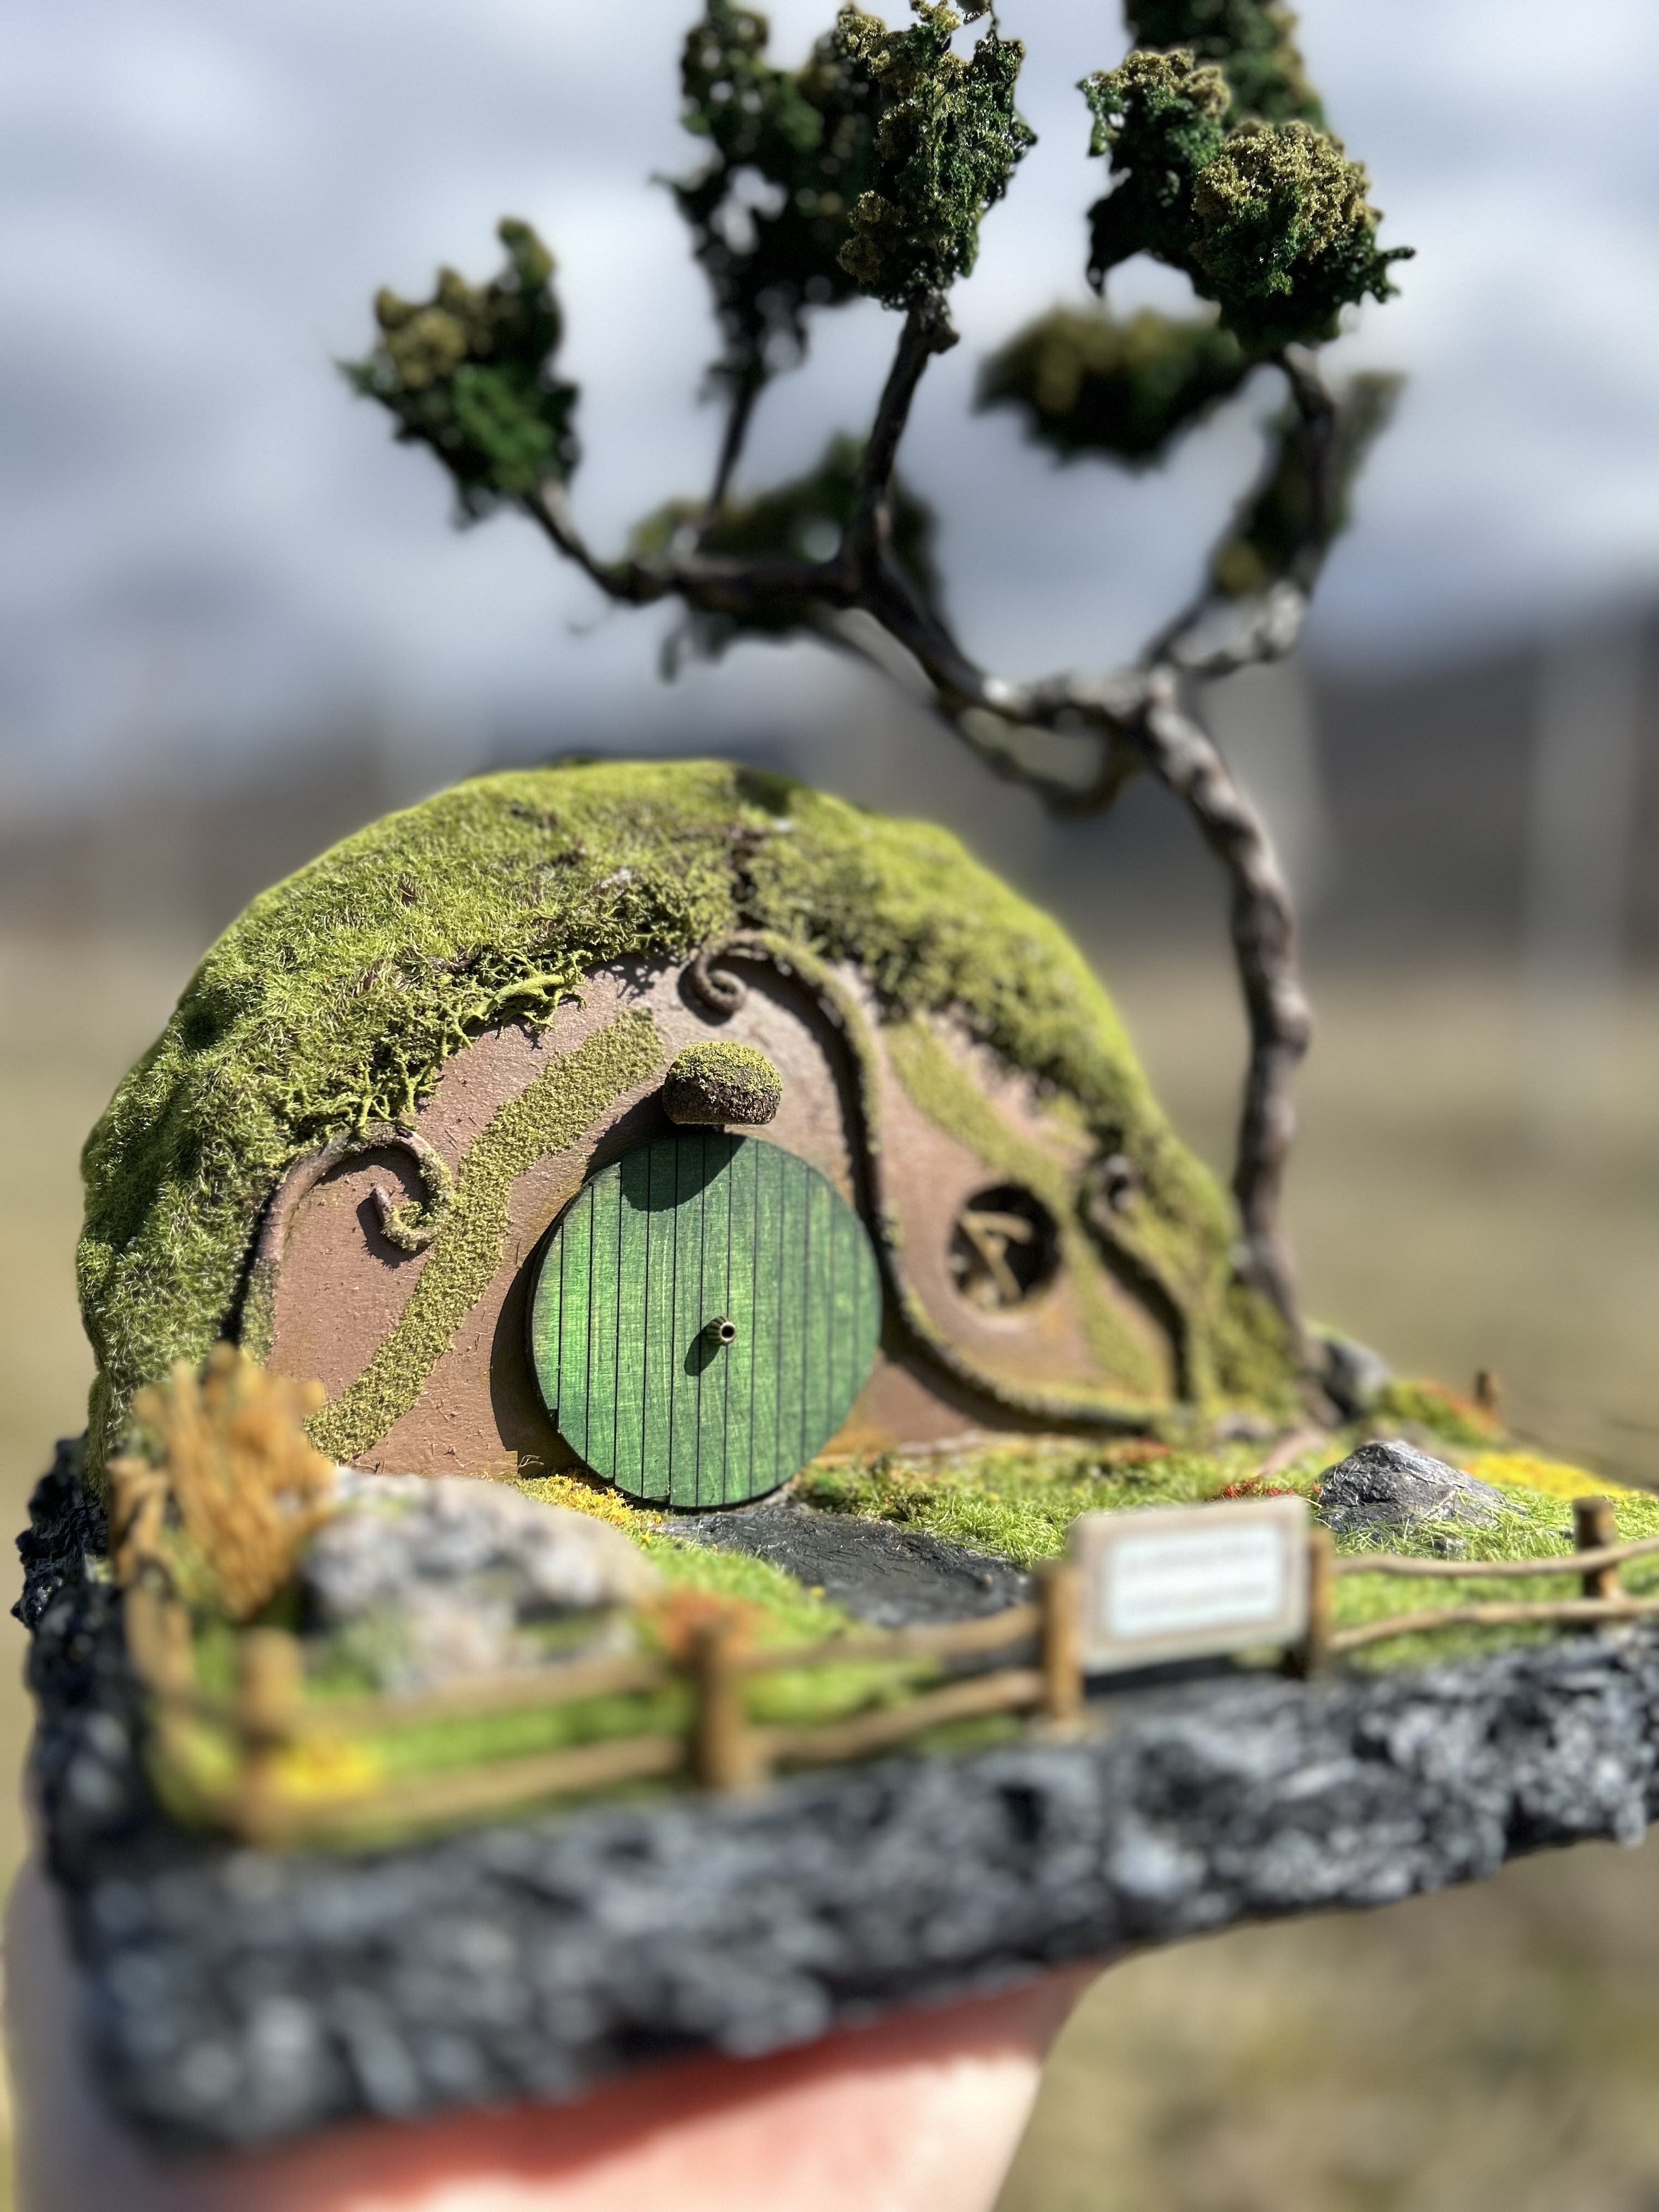 The hobbit house with tree